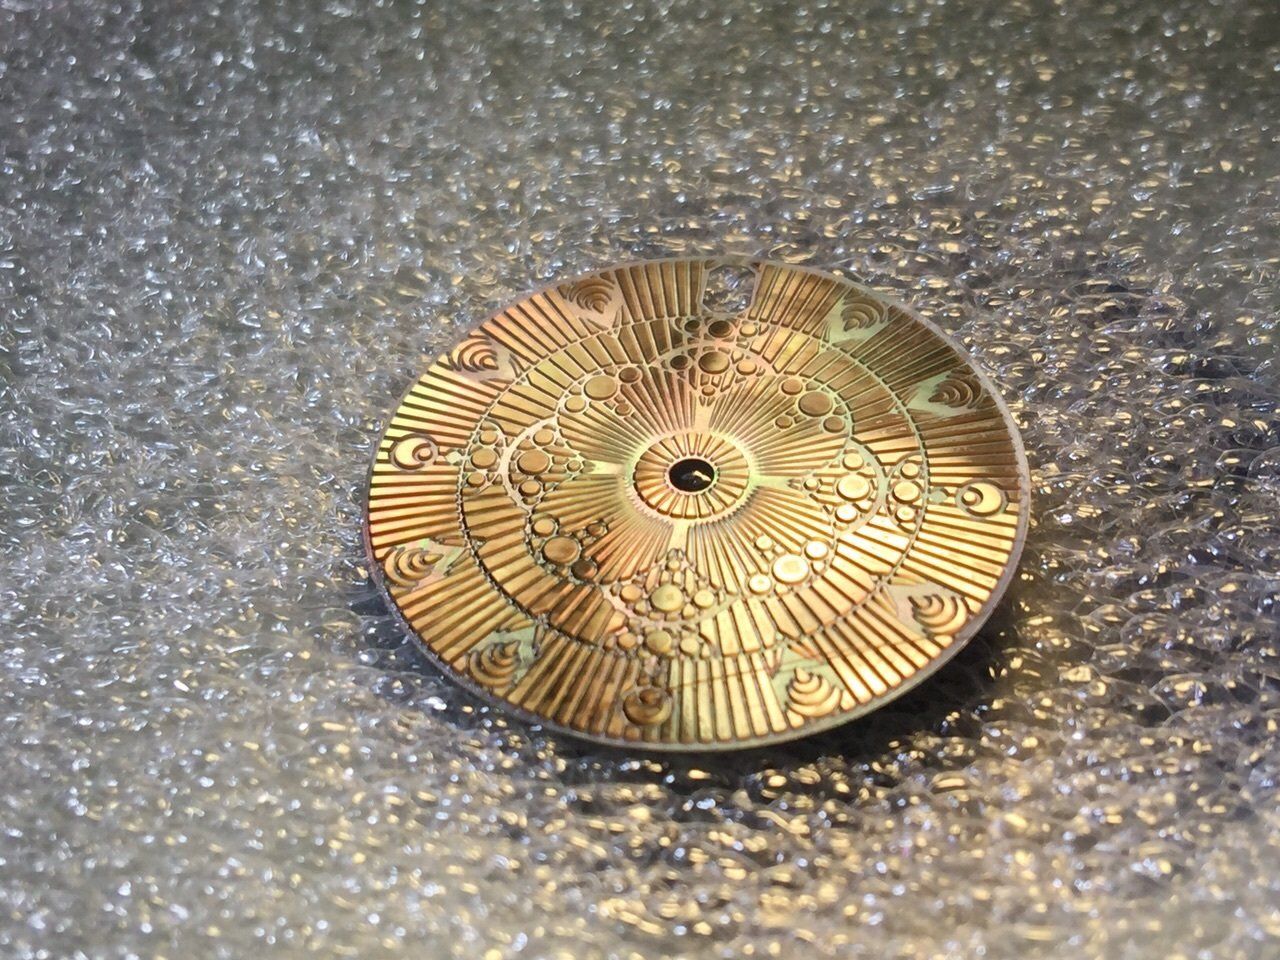 A gold plated button on a silver surface.